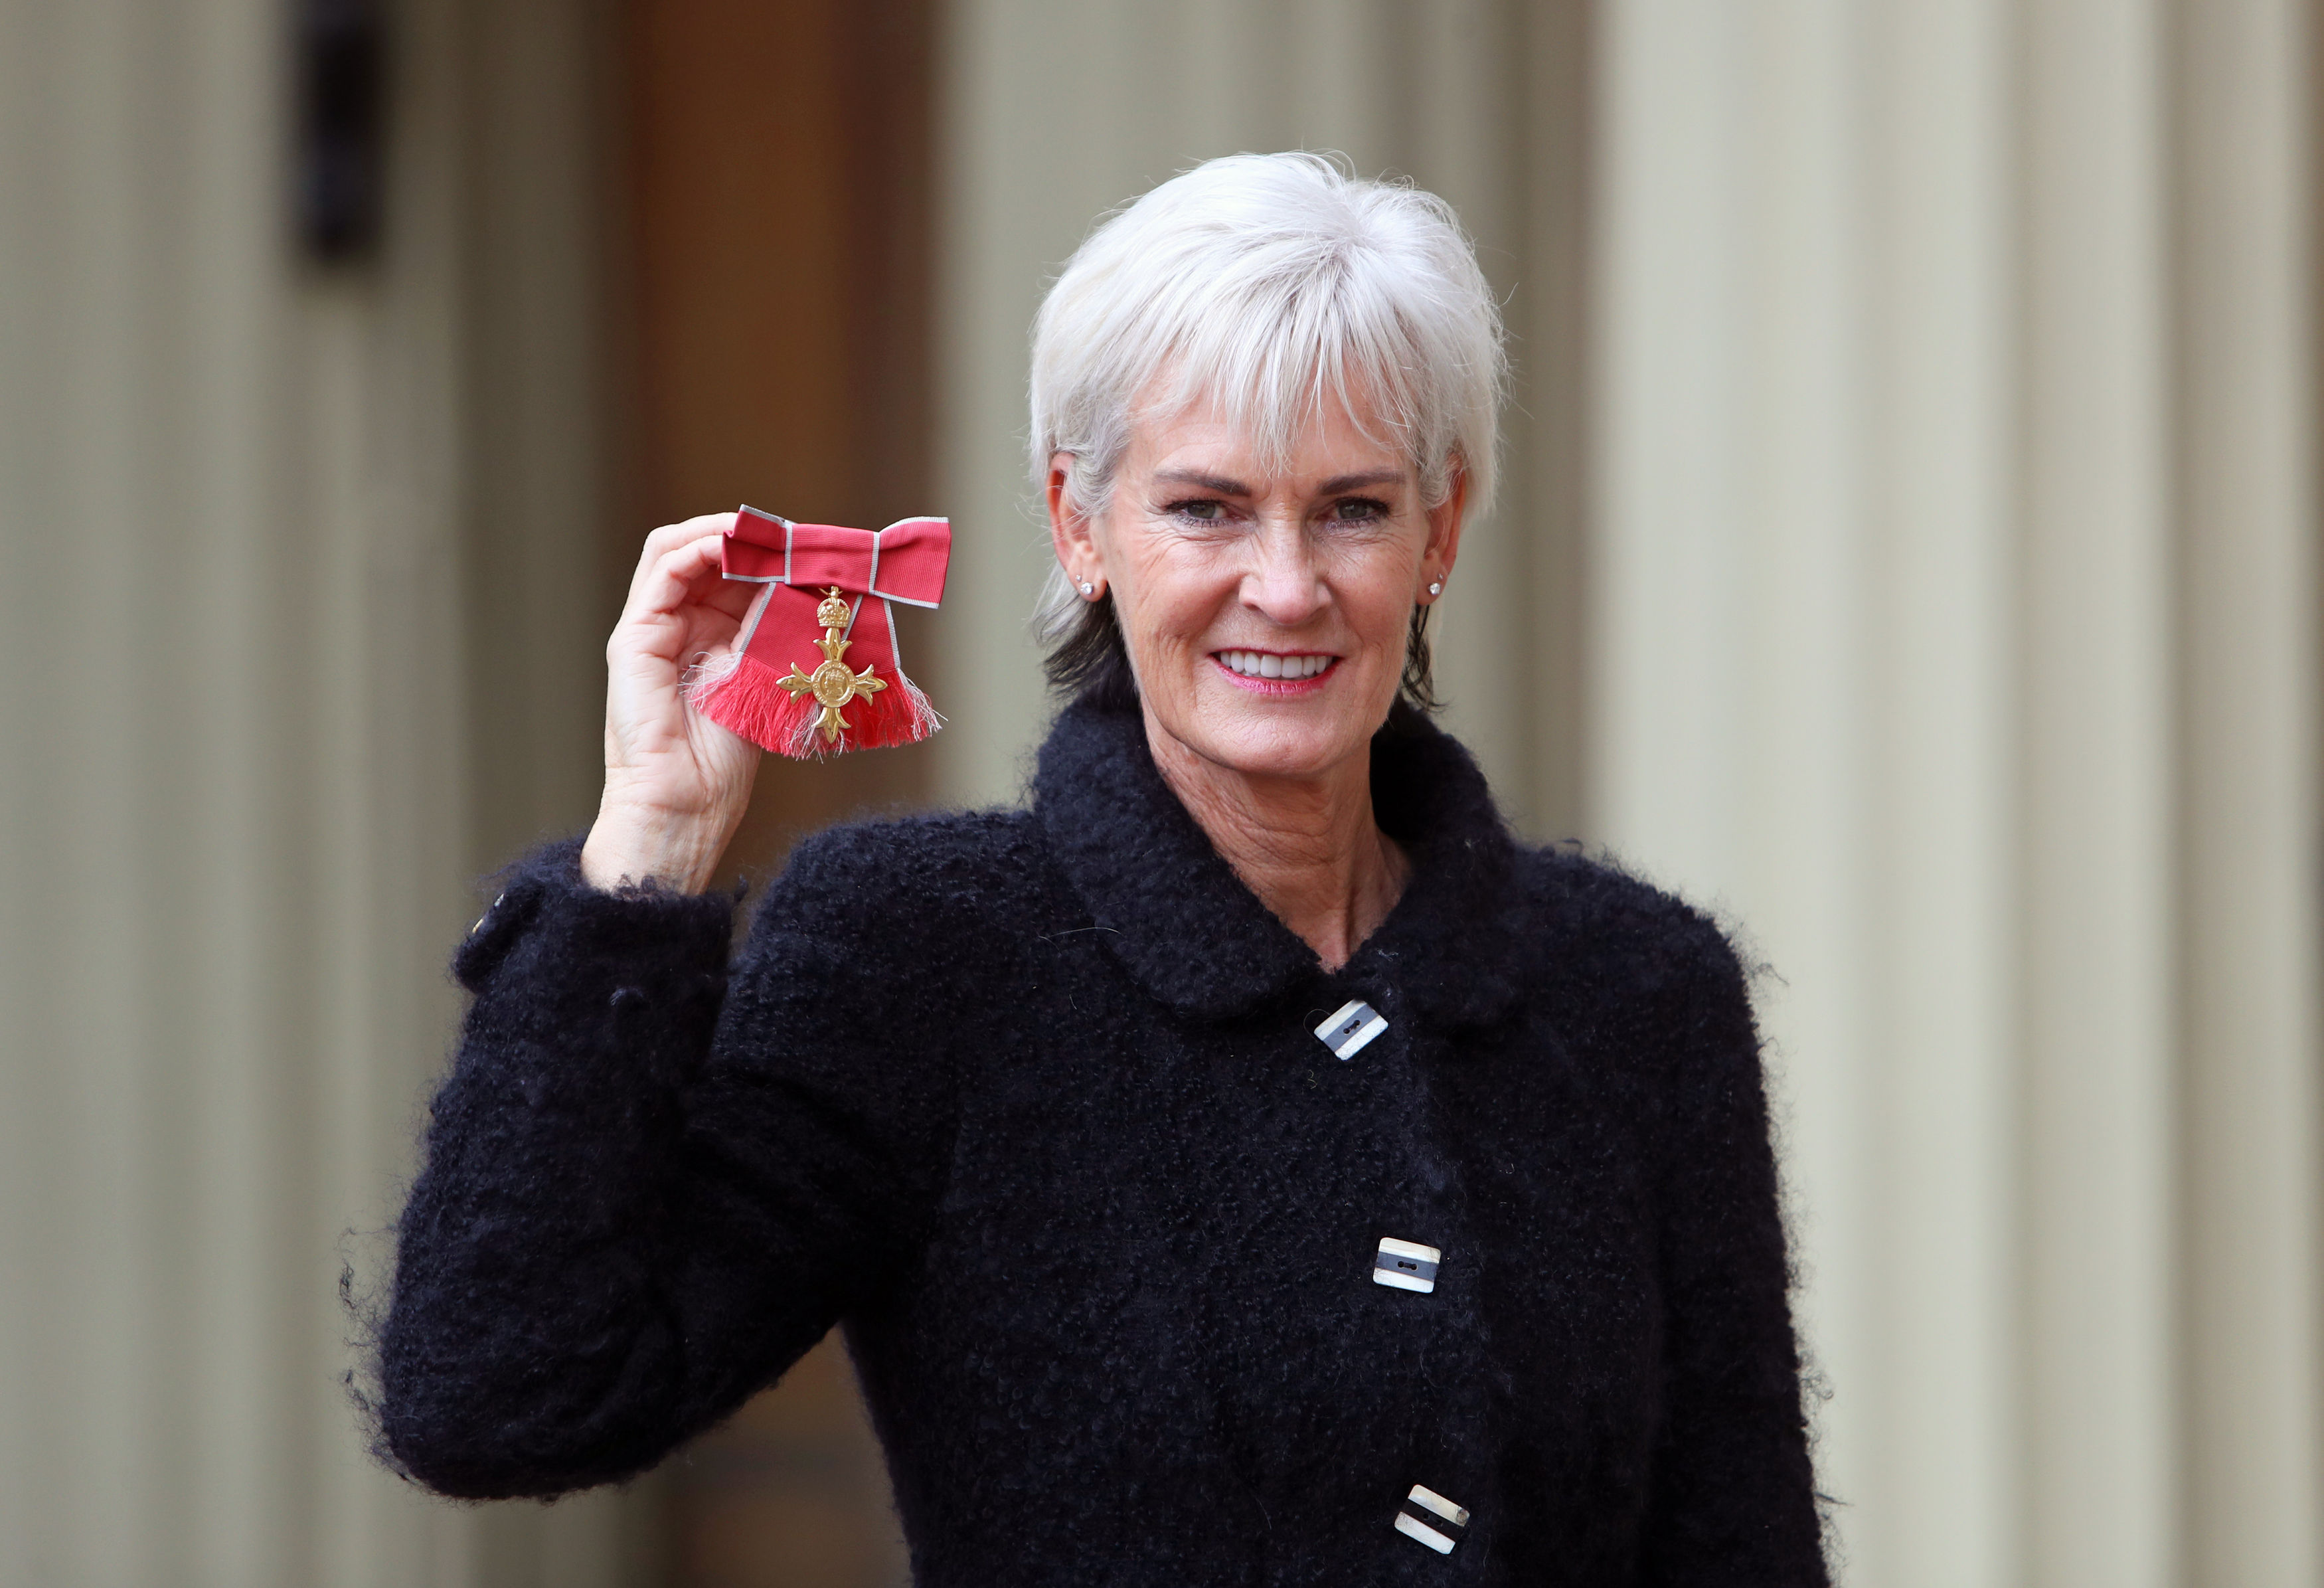 Judy Murray backs change in ATP scheduling after injury-packed 2017